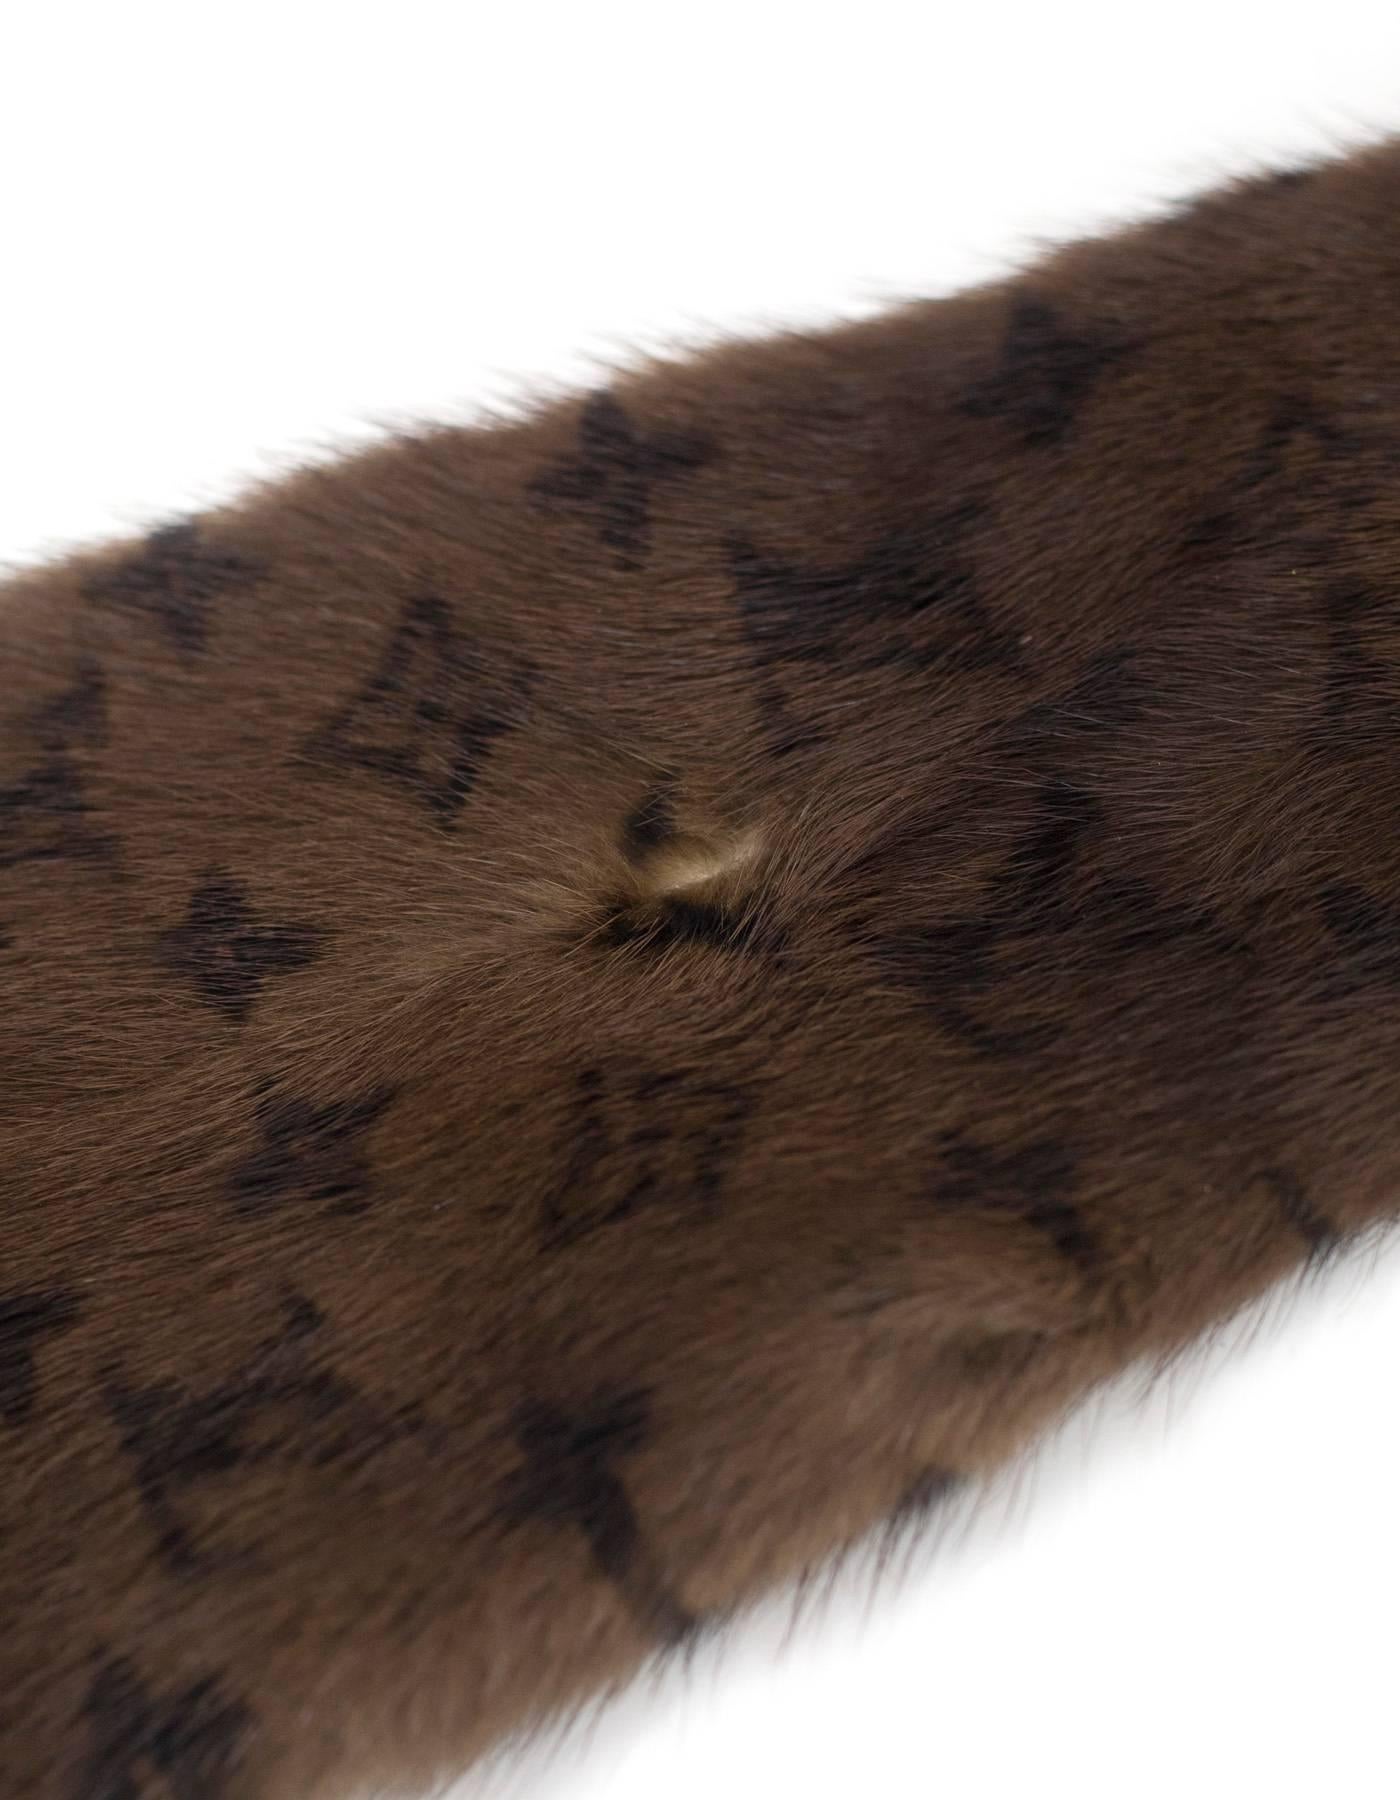 Louis Vuitton Brown Monogram Mink Fur Stole
Features dark LV monogram design throughout

Made In: France
Color: Brown
Composition: 100% mink fur
Overall Condition: Excellent pre-owned condition with the exception of faint perfume scent
Measurements: